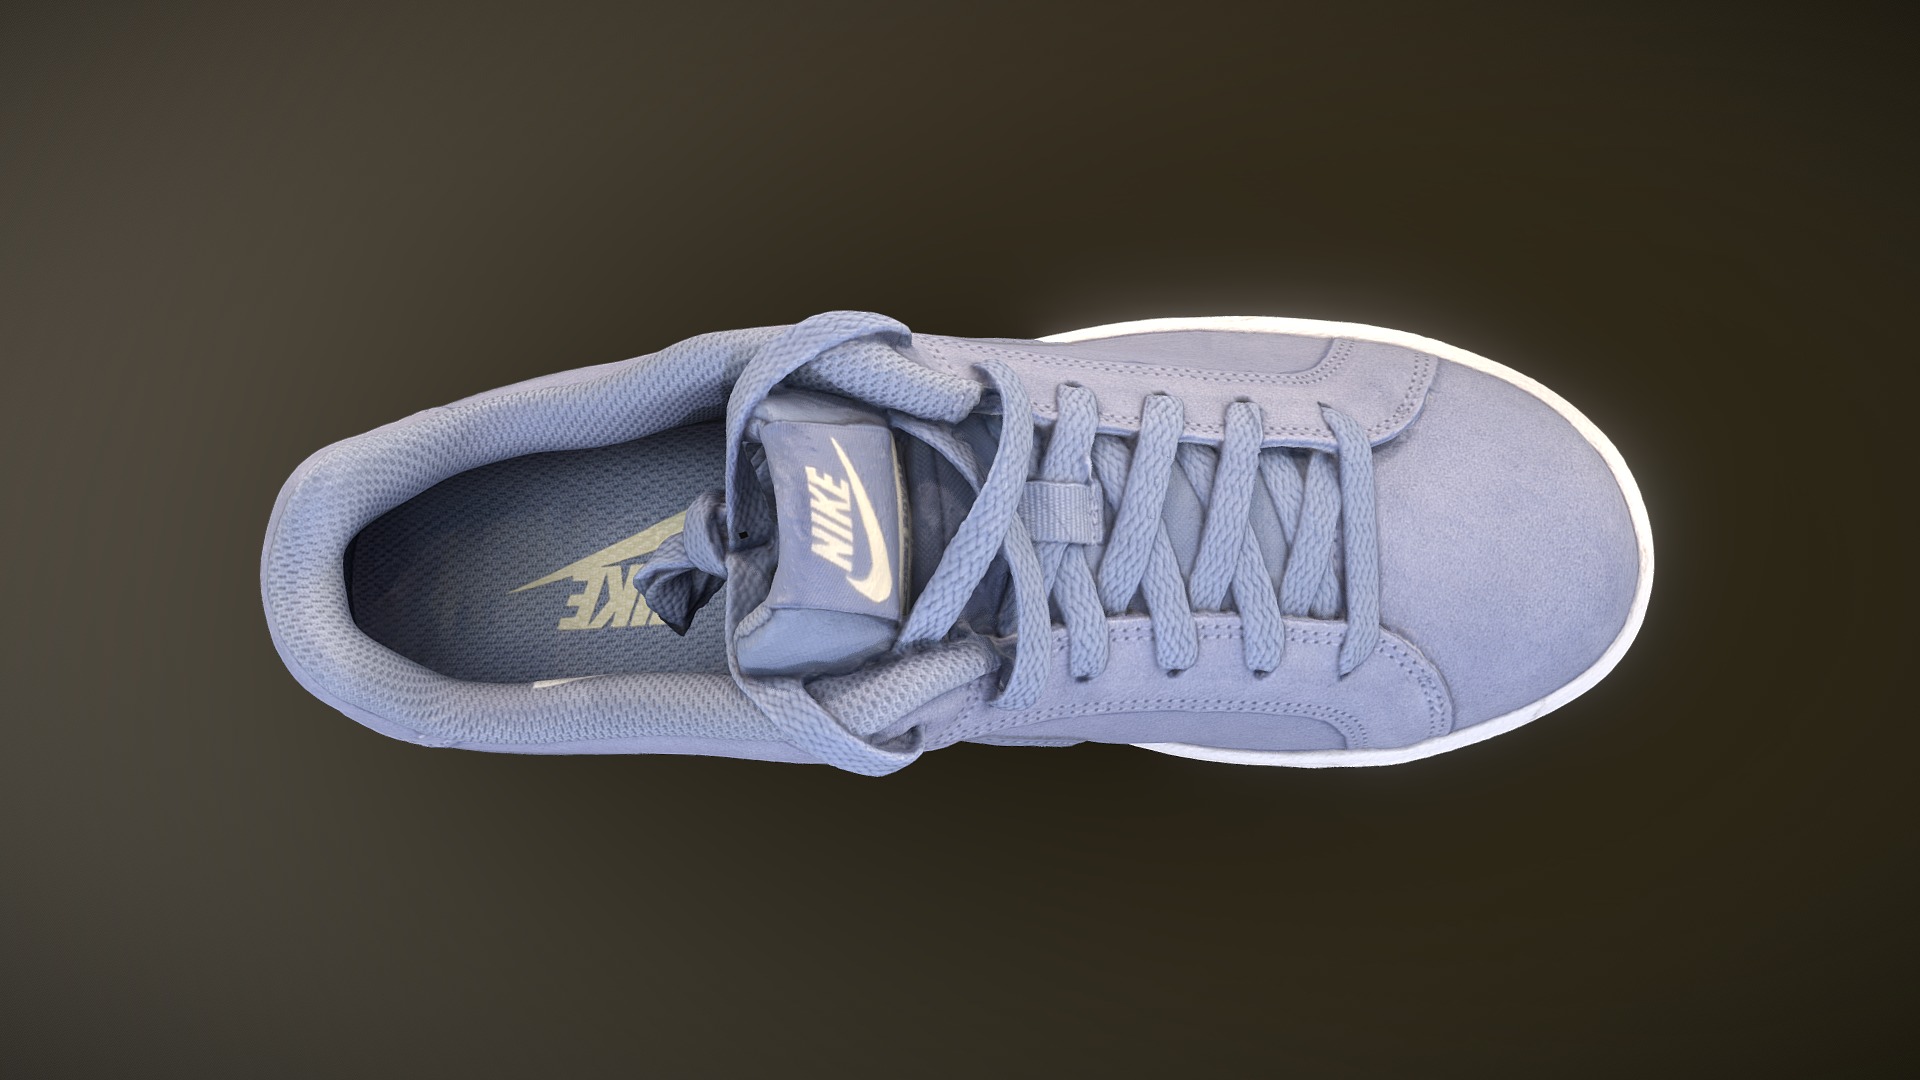 3D model Nike Court Royale Suede - This is a 3D model of the Nike Court Royale Suede. The 3D model is about a white and blue shoe.